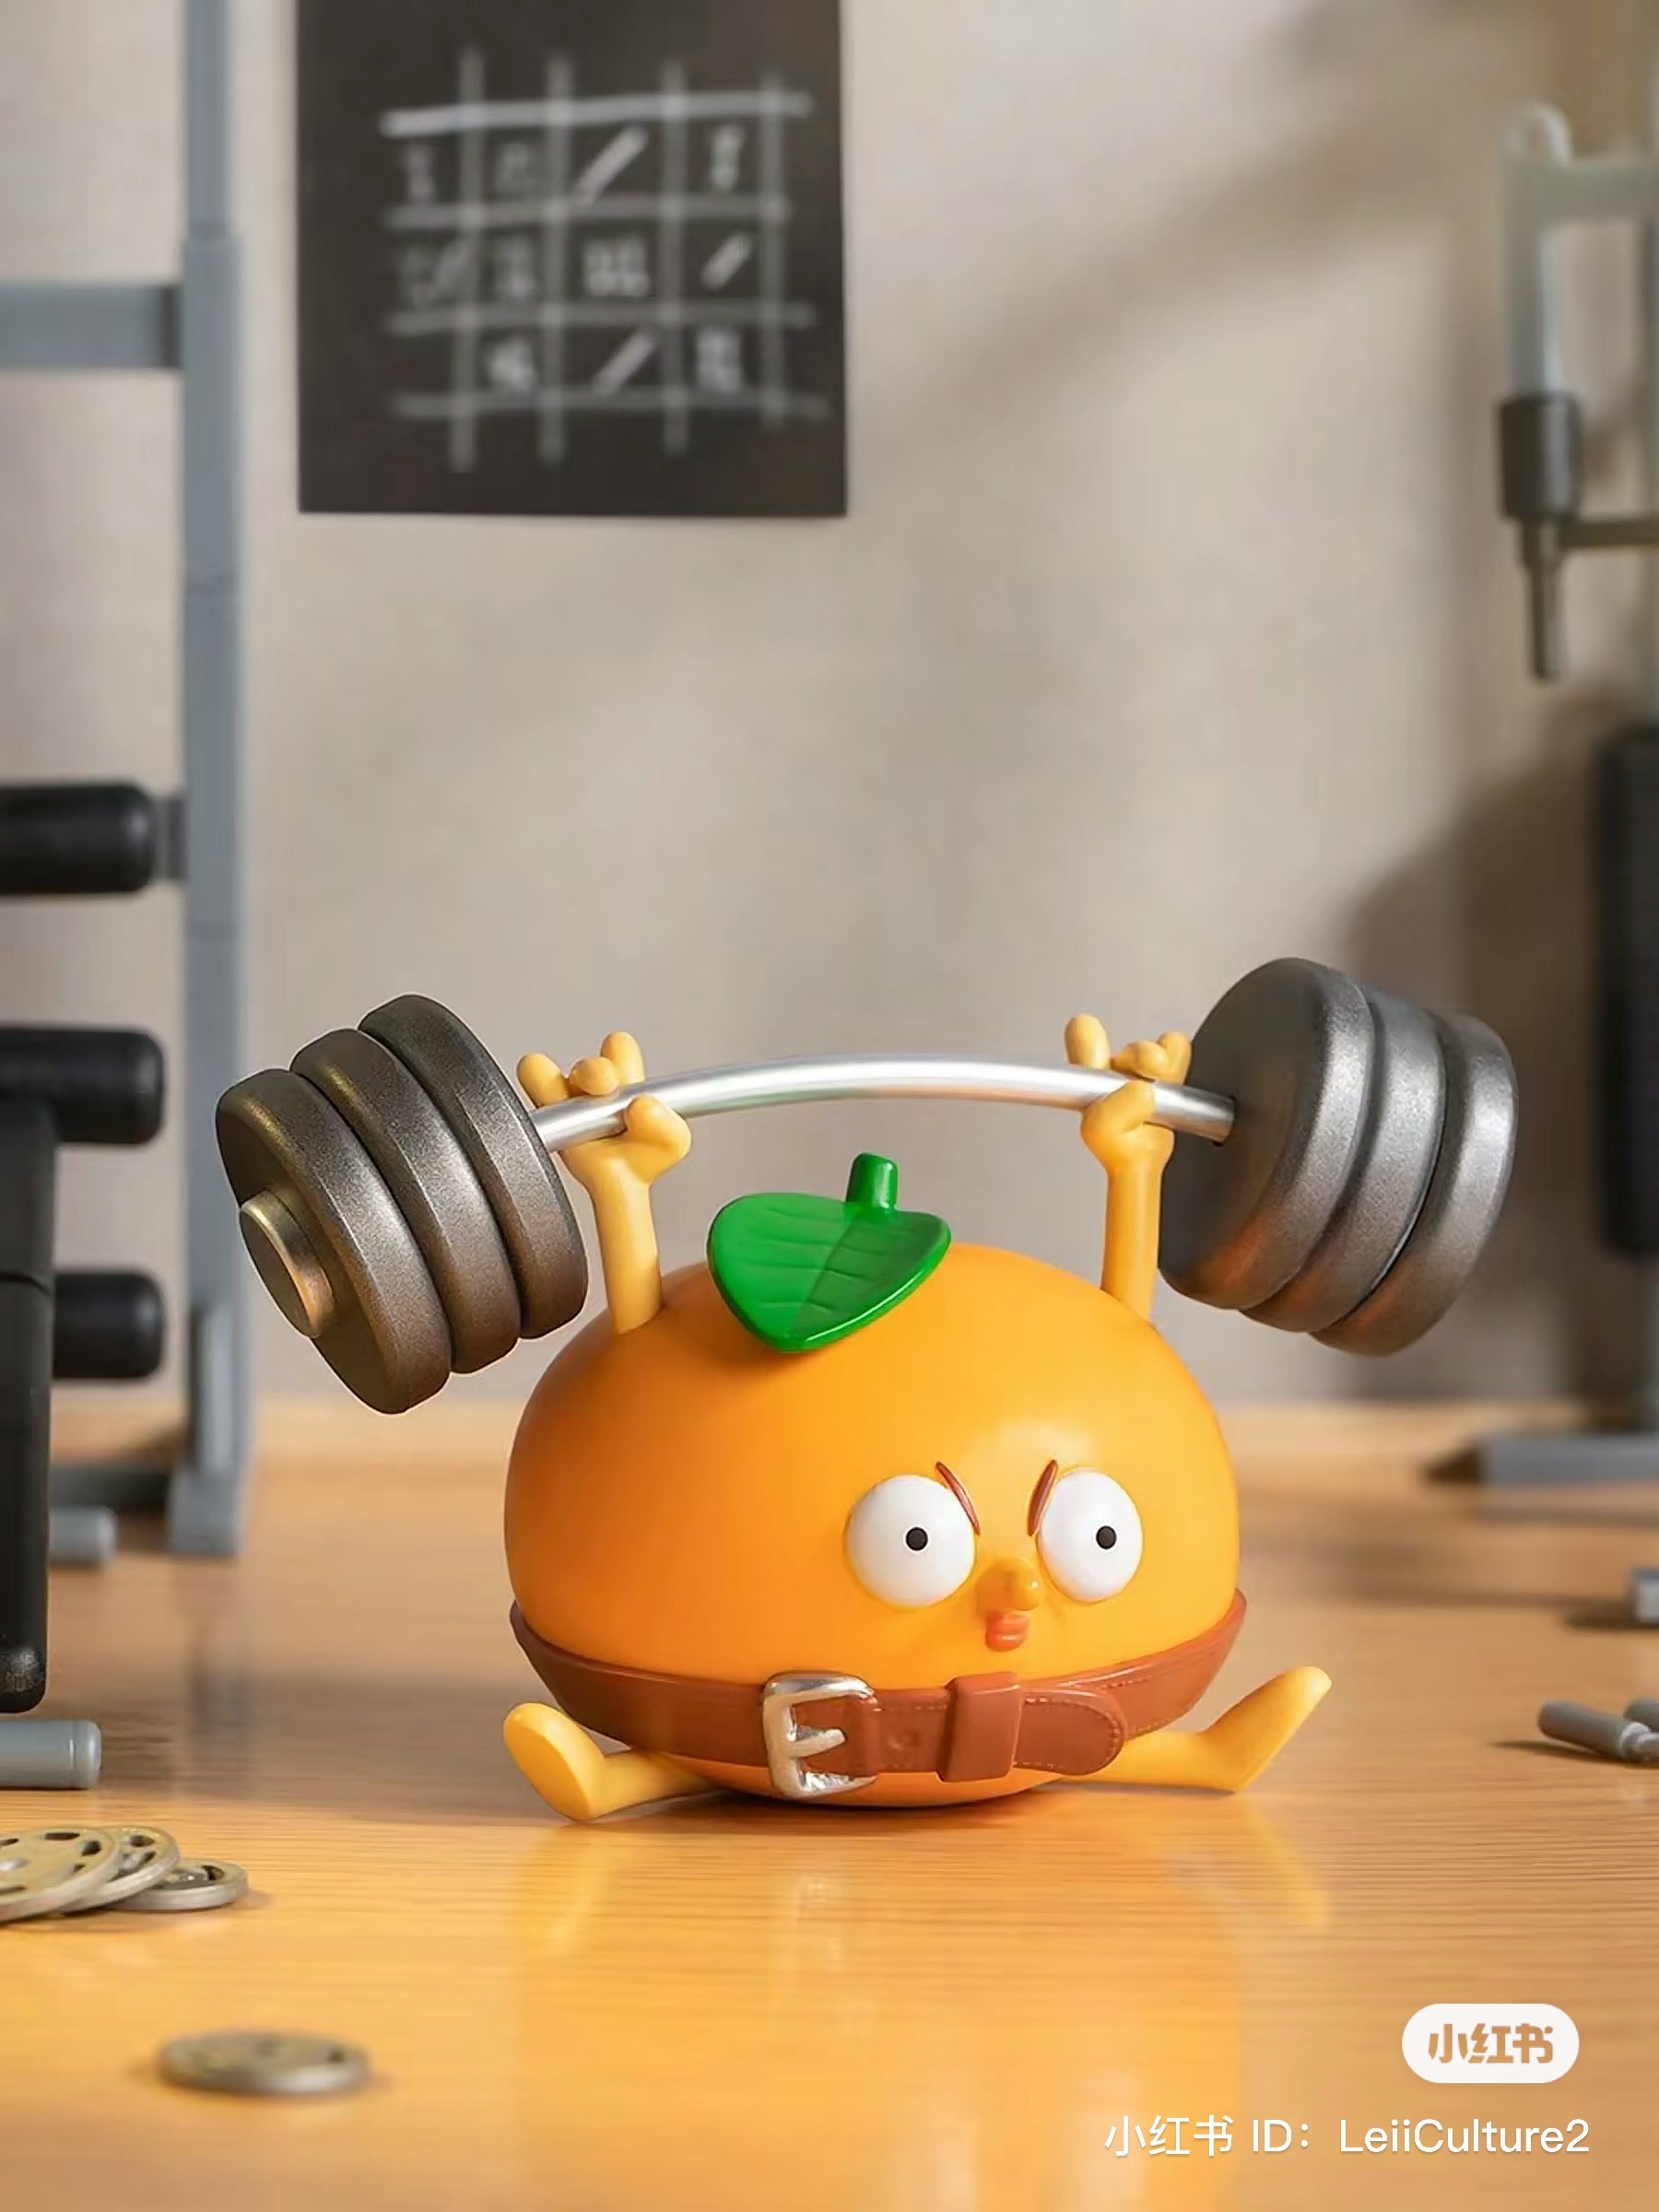 What the Man Daily Blind Box Series: Toy orange with barbell, cartoon character with bar, dumbbell, leaf, and more.